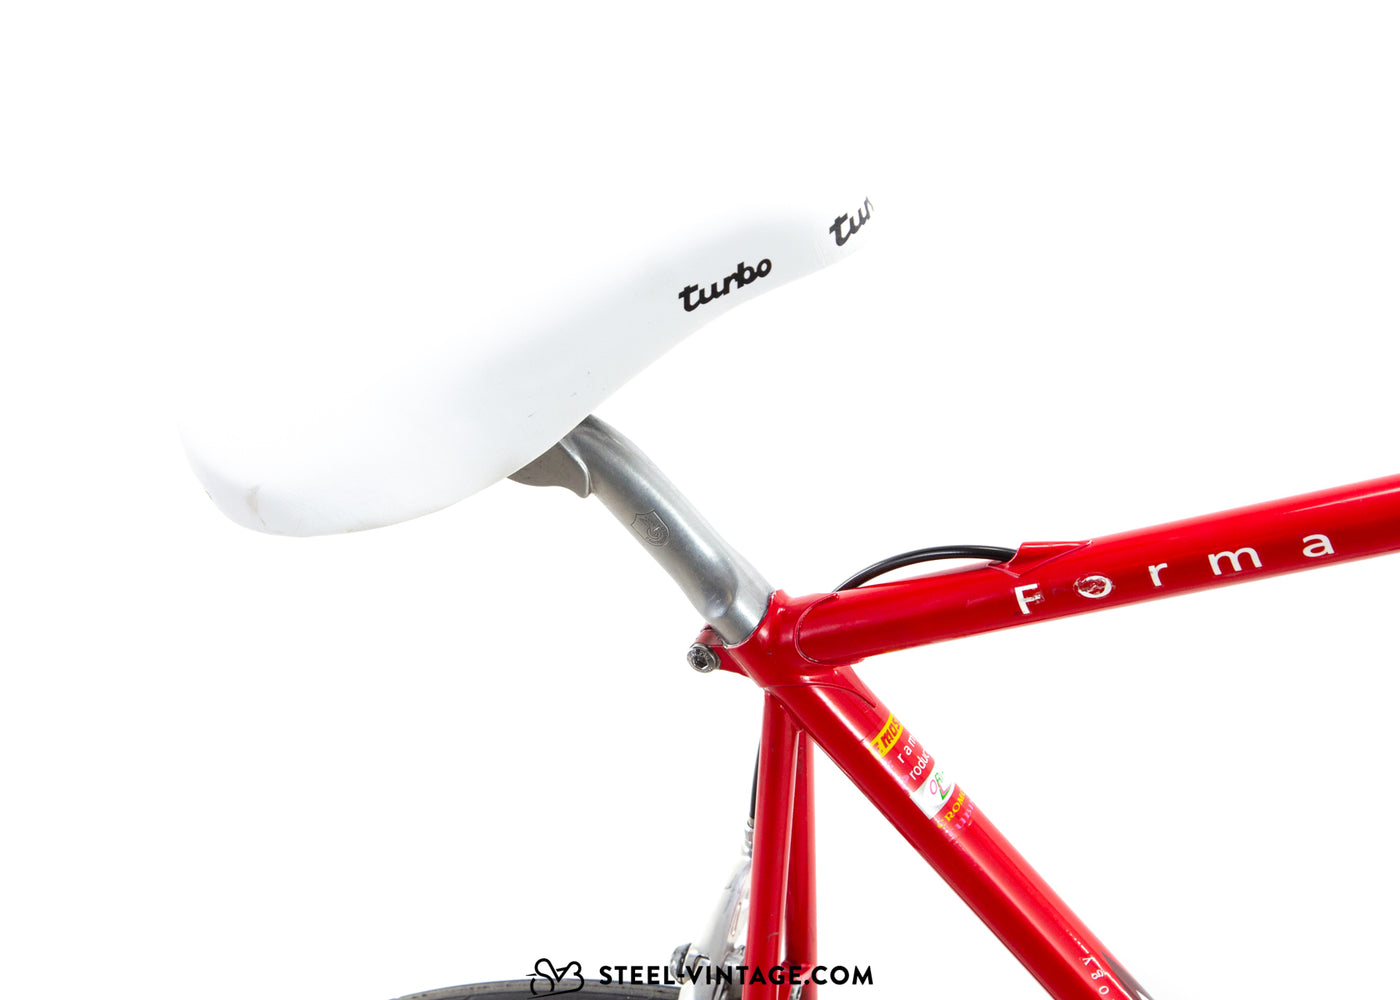 Francesco Moser Forma Road Bicycle 1990s